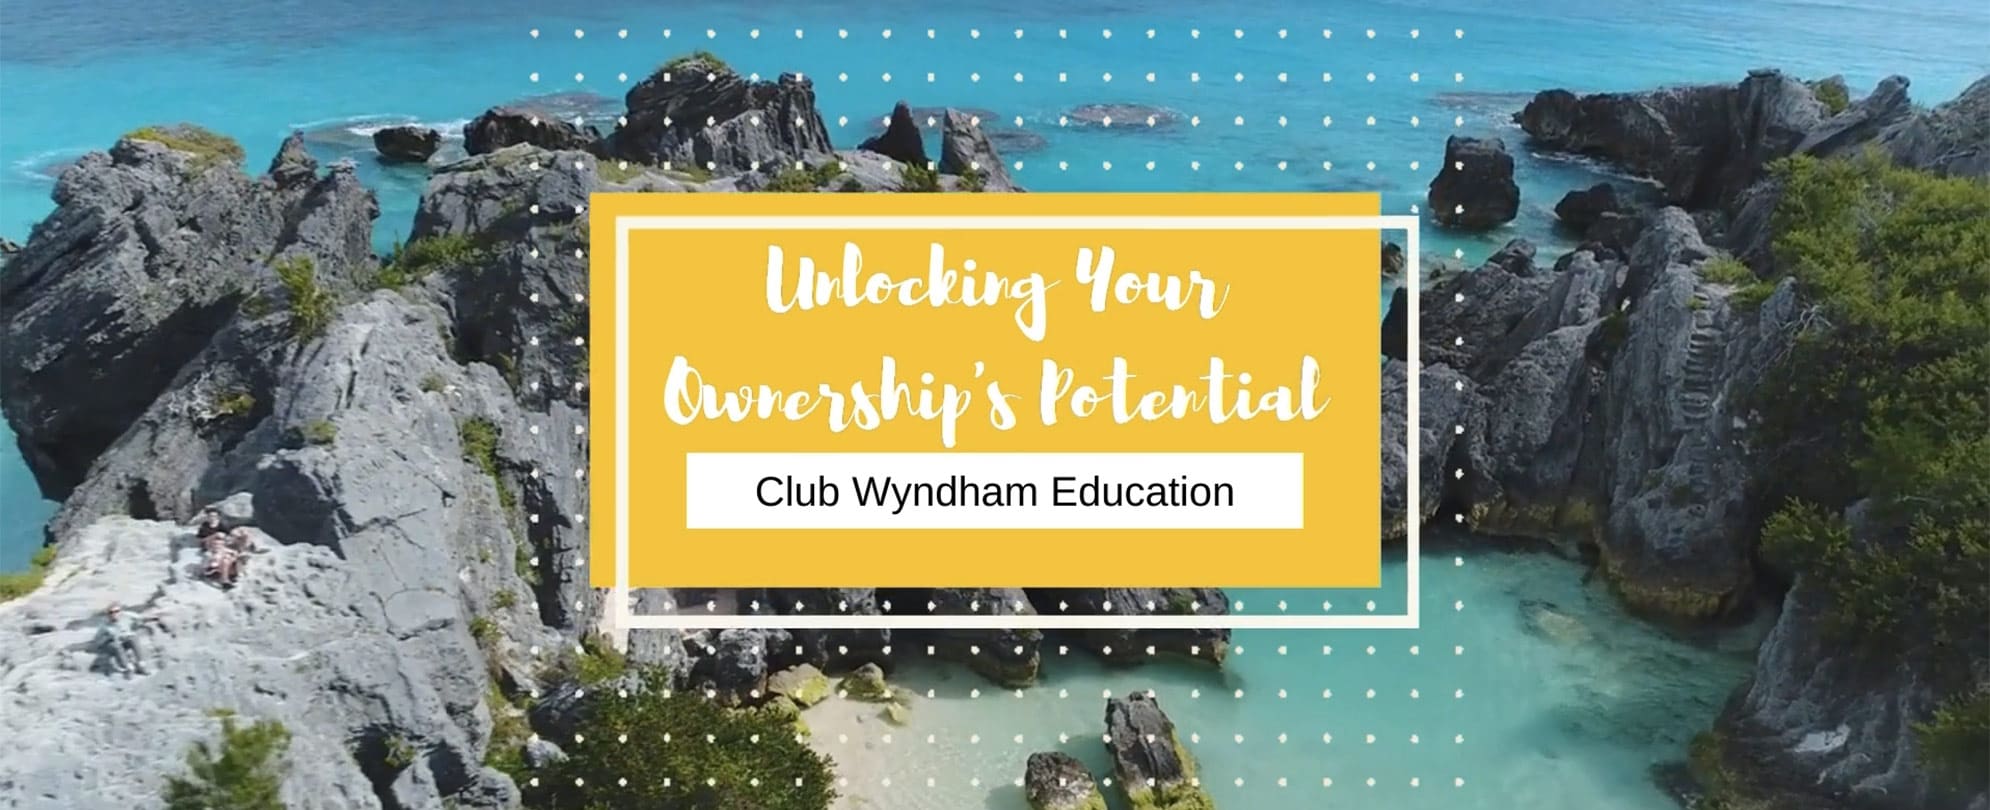 A rocky beach behind the words "Unlocking Your Ownership Potential - Club Wyndham Education."